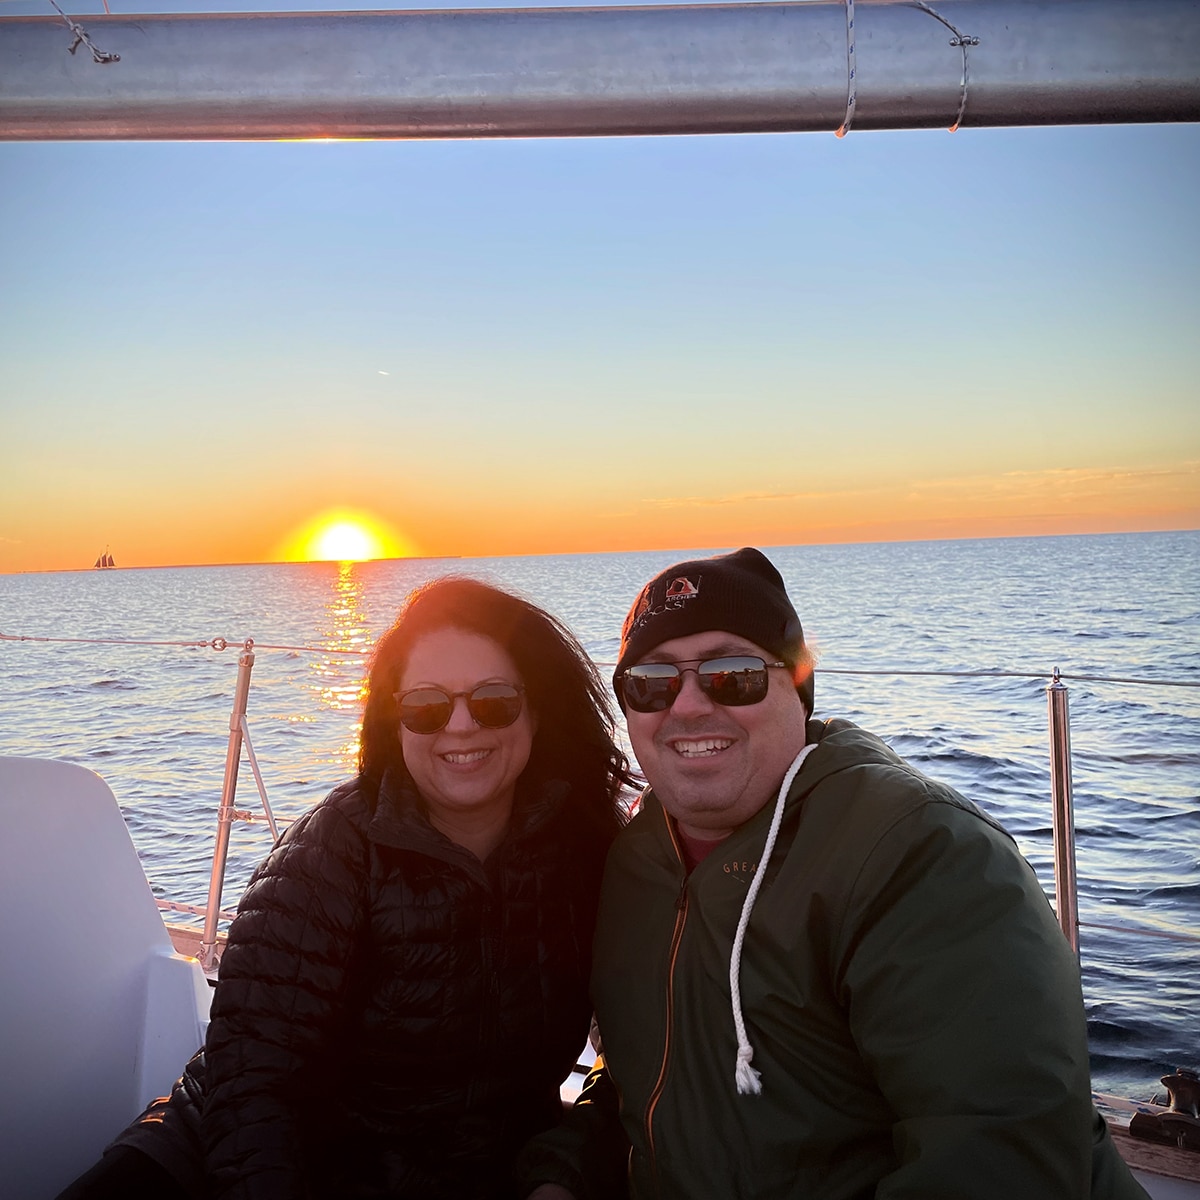 Steve and Rebecca Blackwell on a sailboat in Door County, Wisconsin with the sun setting in the background.